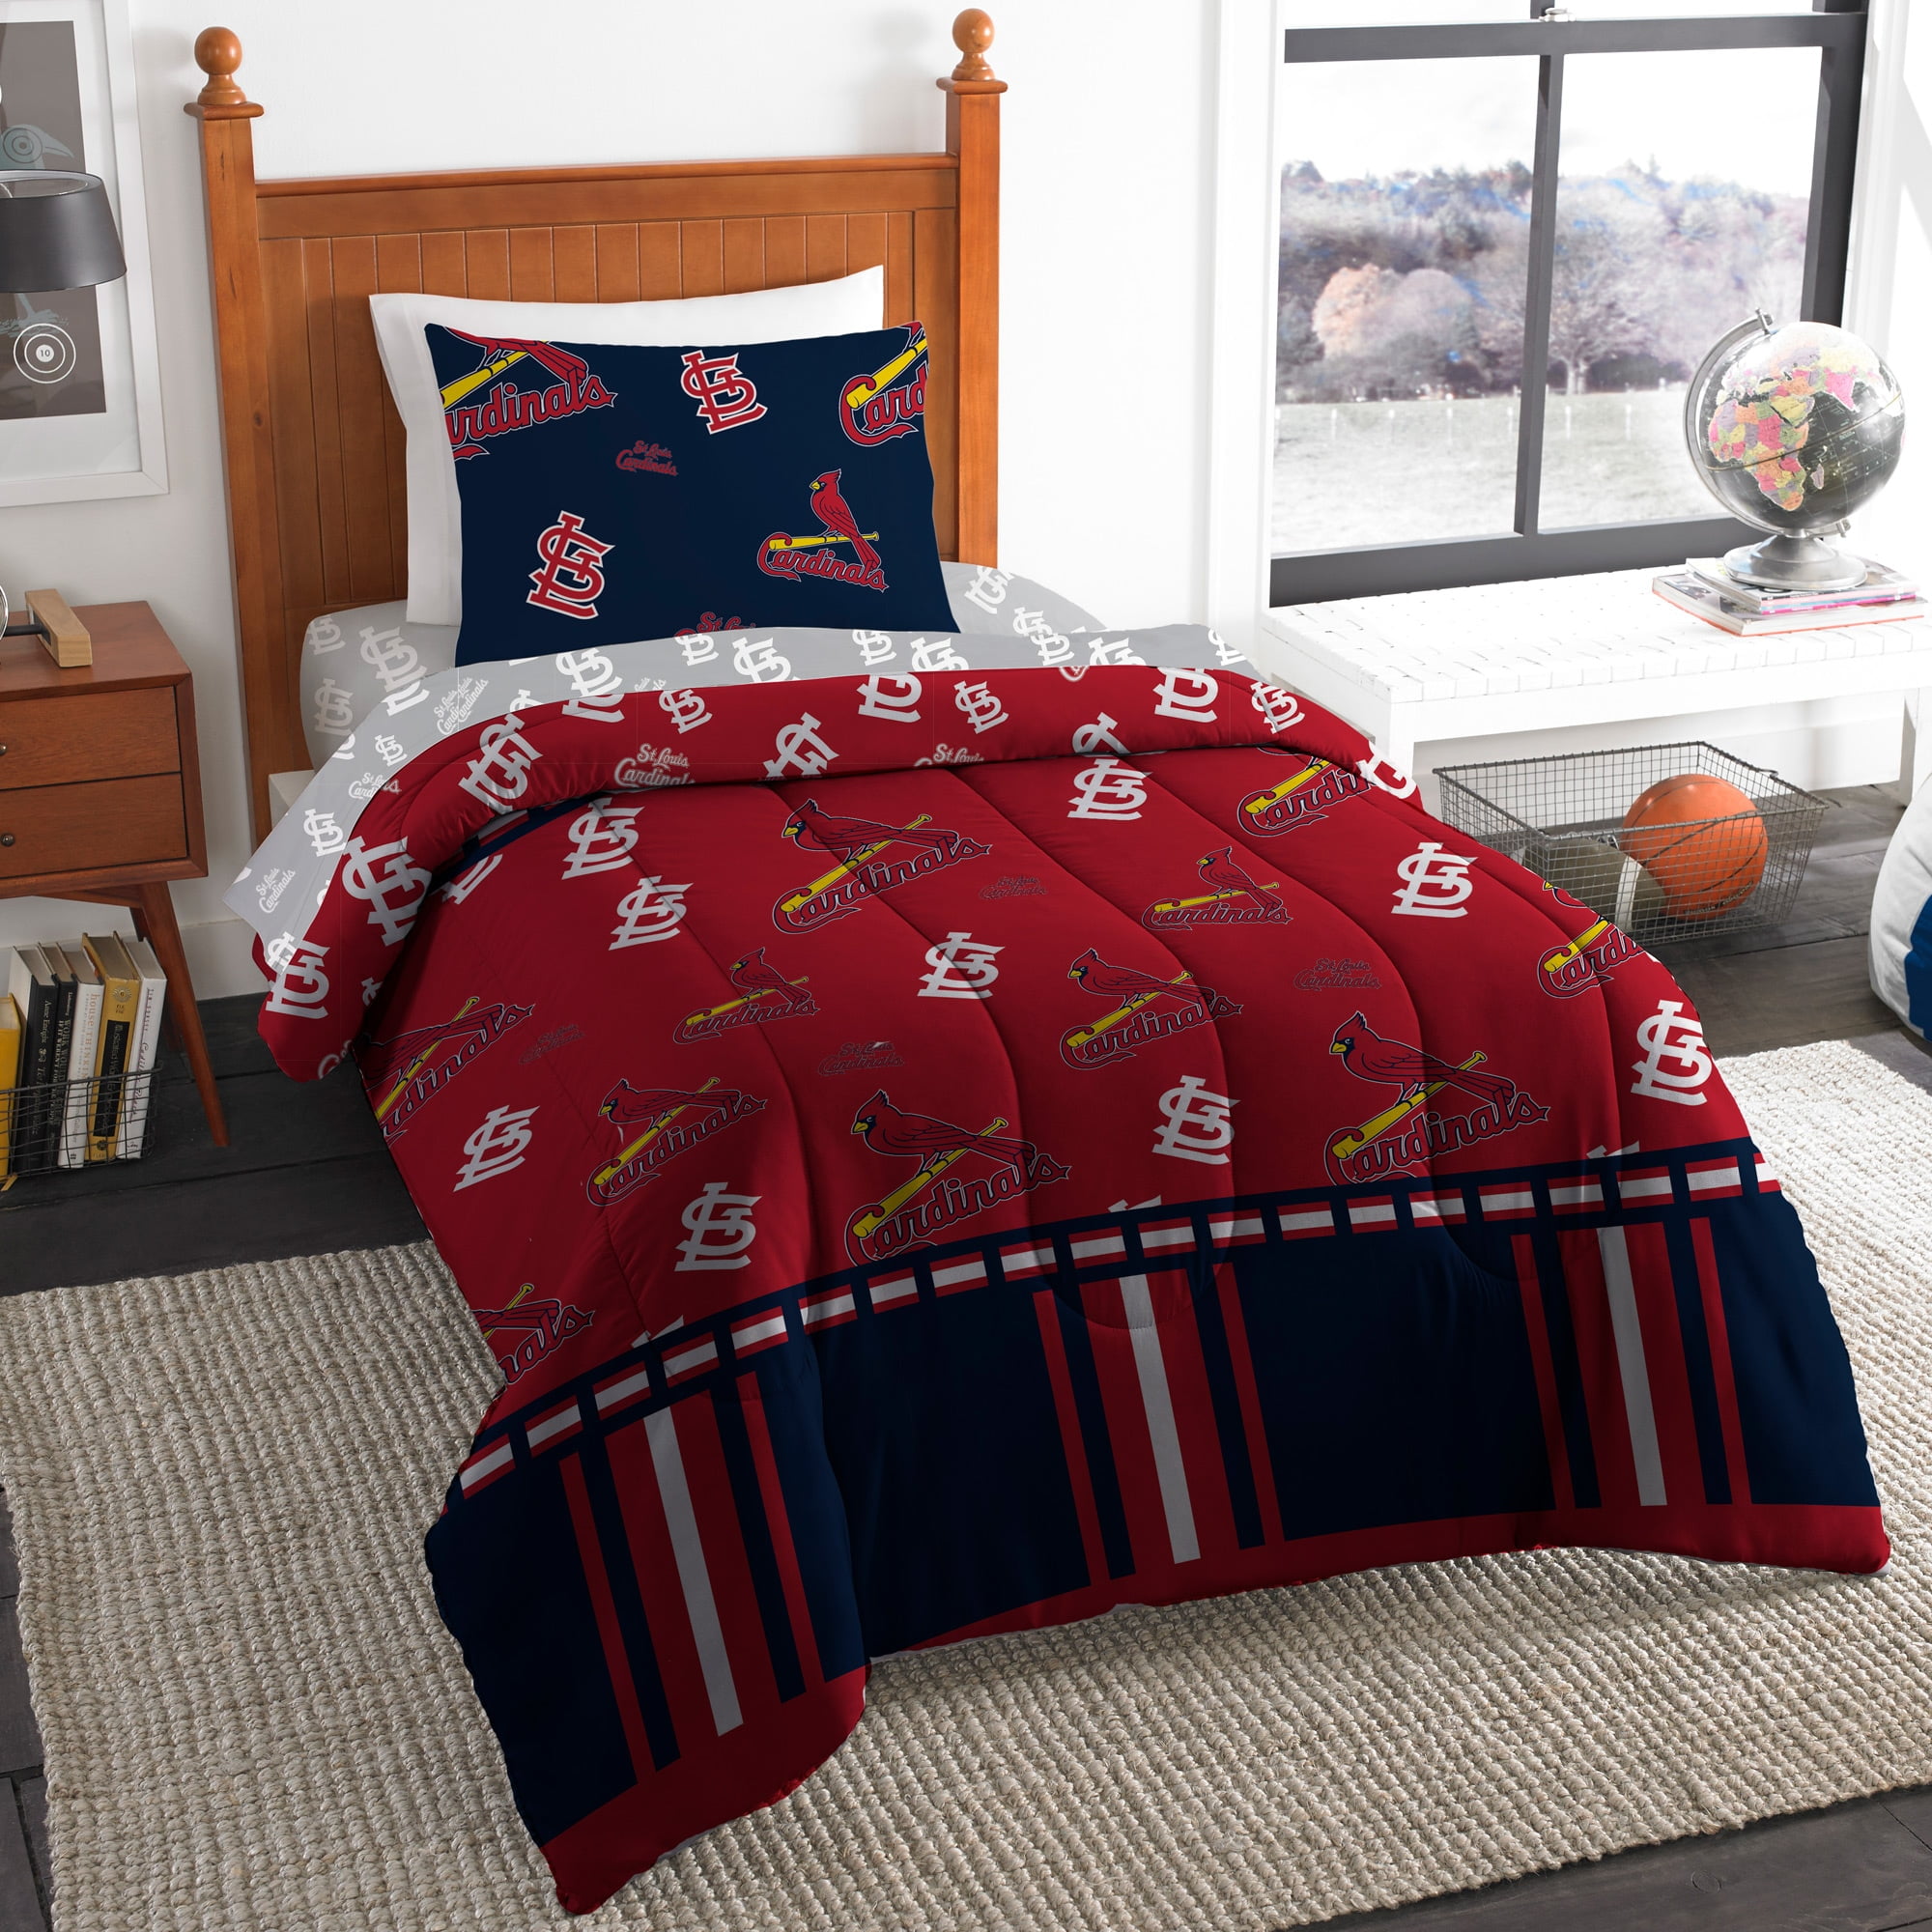 COL 864 Louisville Cardinals Full Bed In a Bag Set - Bed Bath & Beyond -  29891984